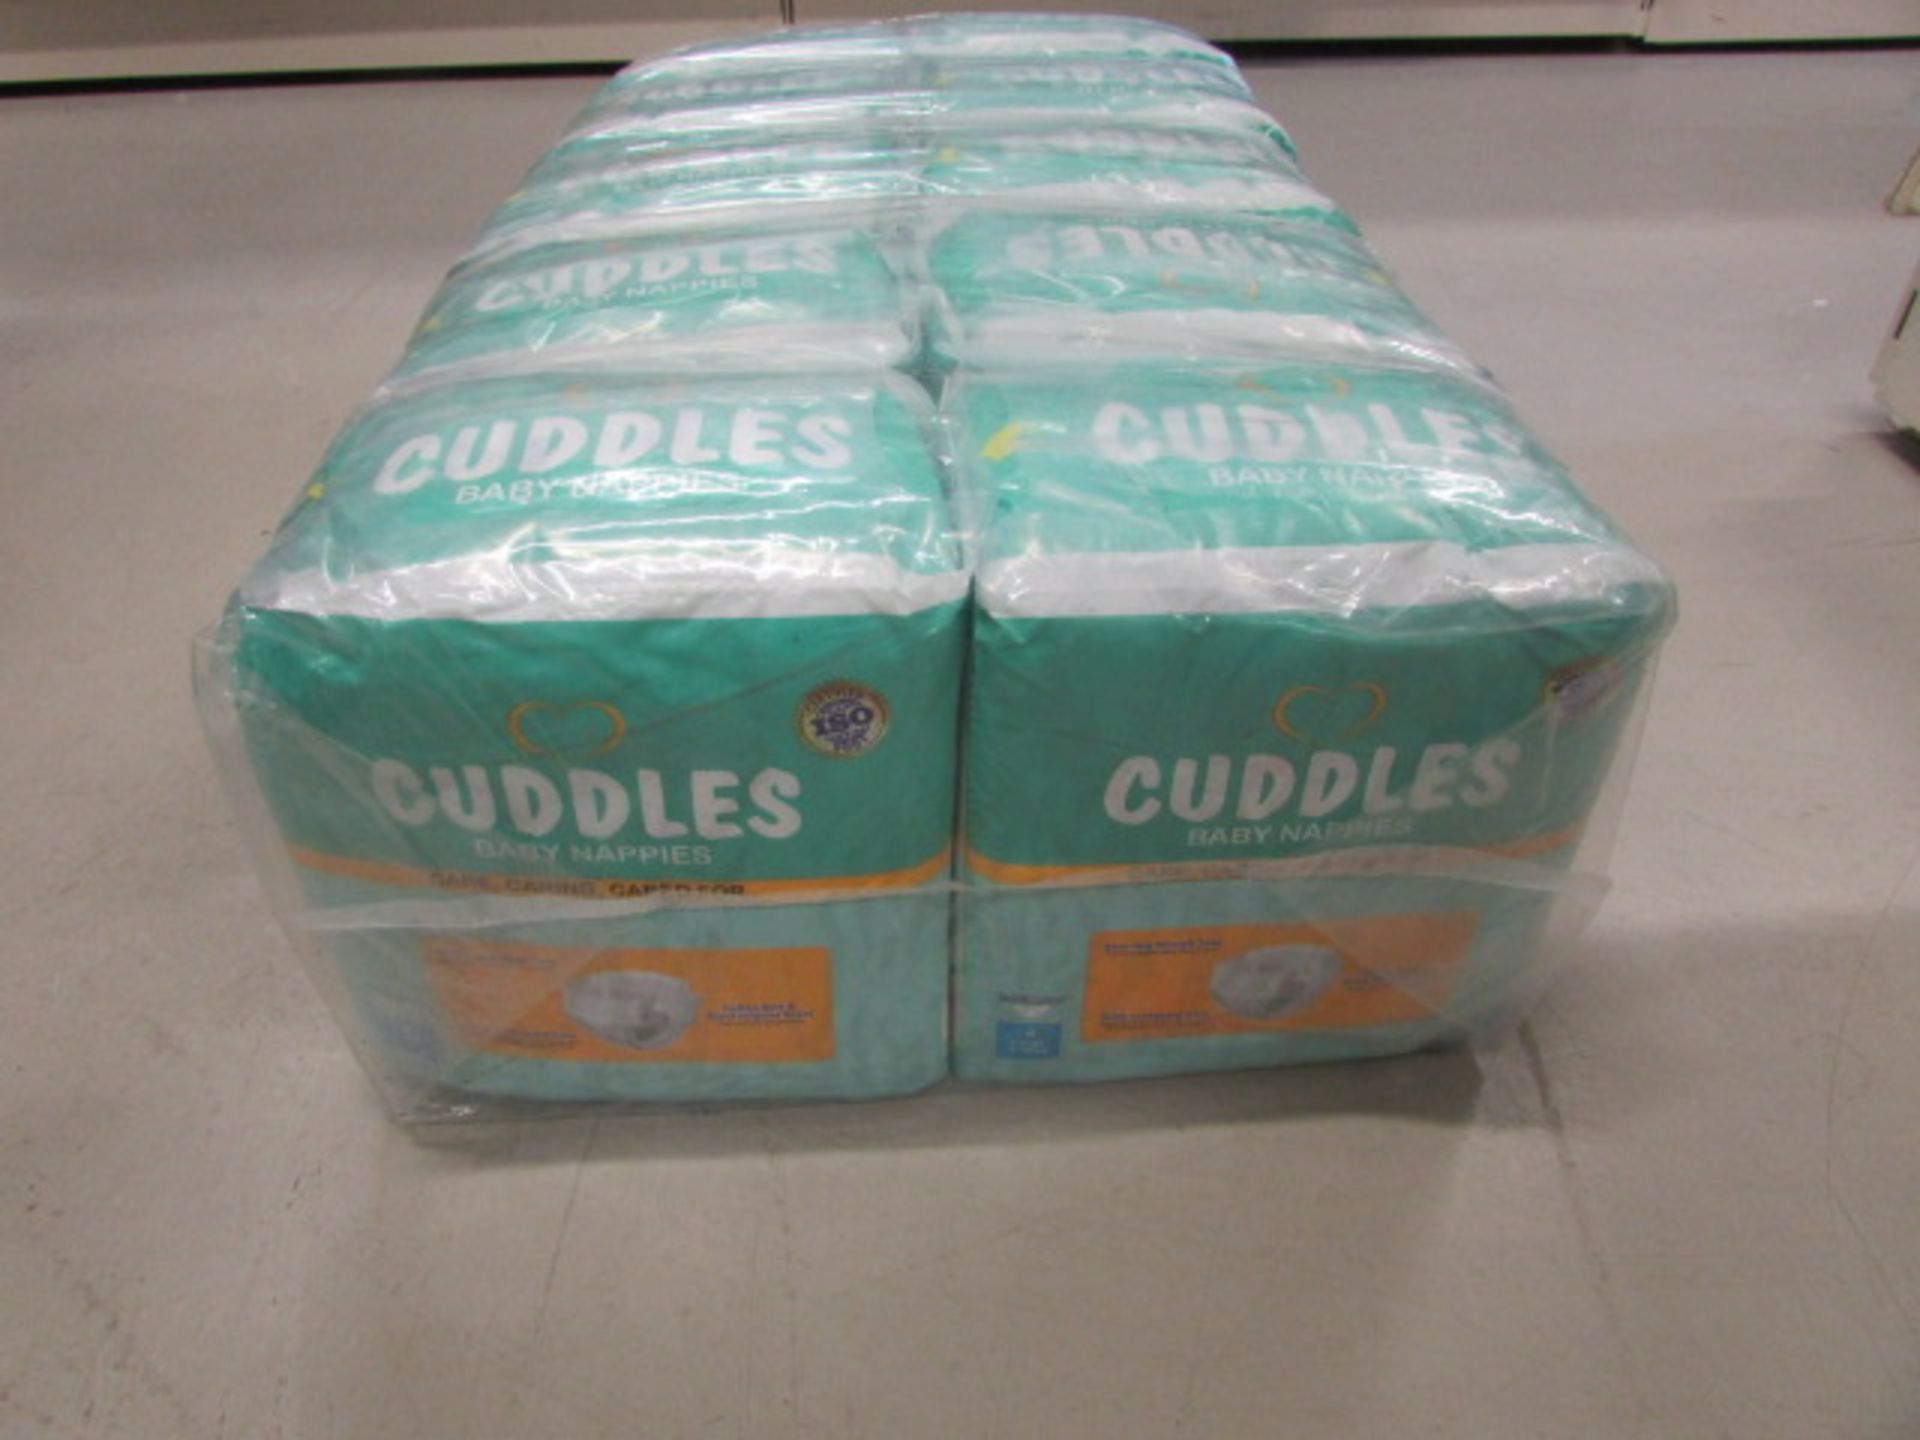 1 x Outer Carton, 10 Packs In An Outer, 18 Nappies in A Pack (180 Nappies In Total) [Size 2]